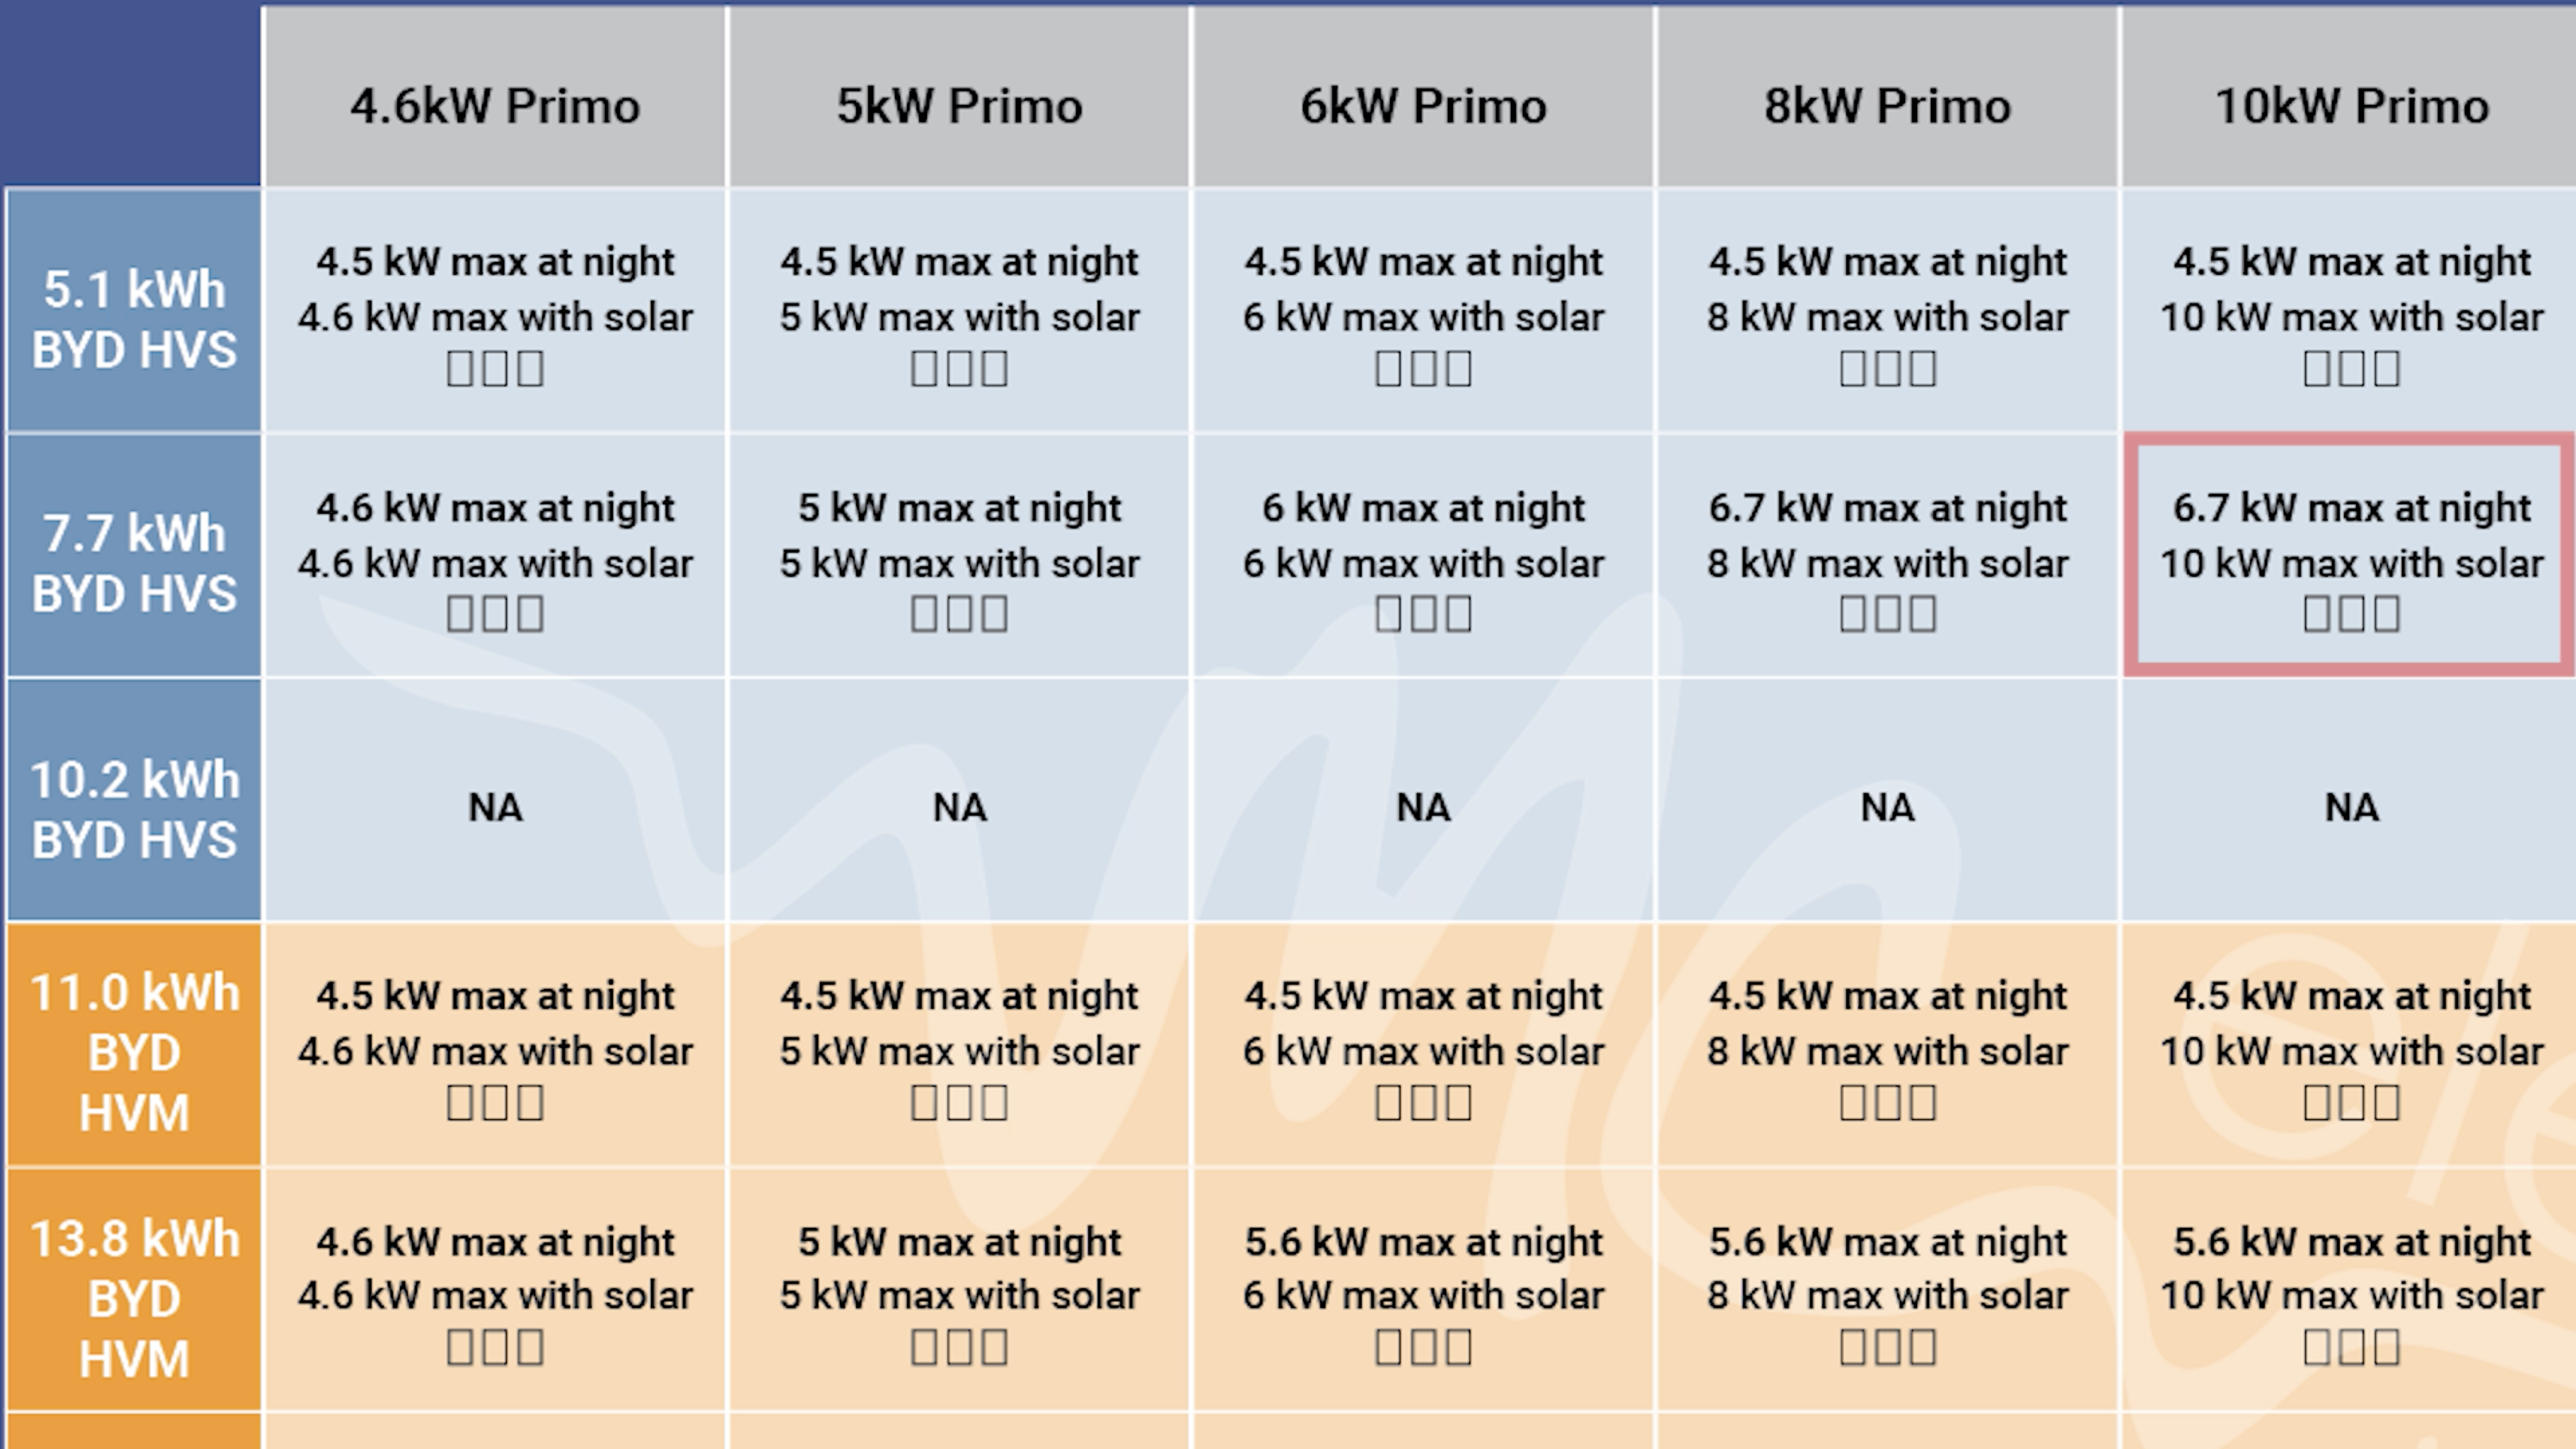 byd sizing guide 10kW Fronius Primo with 7.7kWh BYD